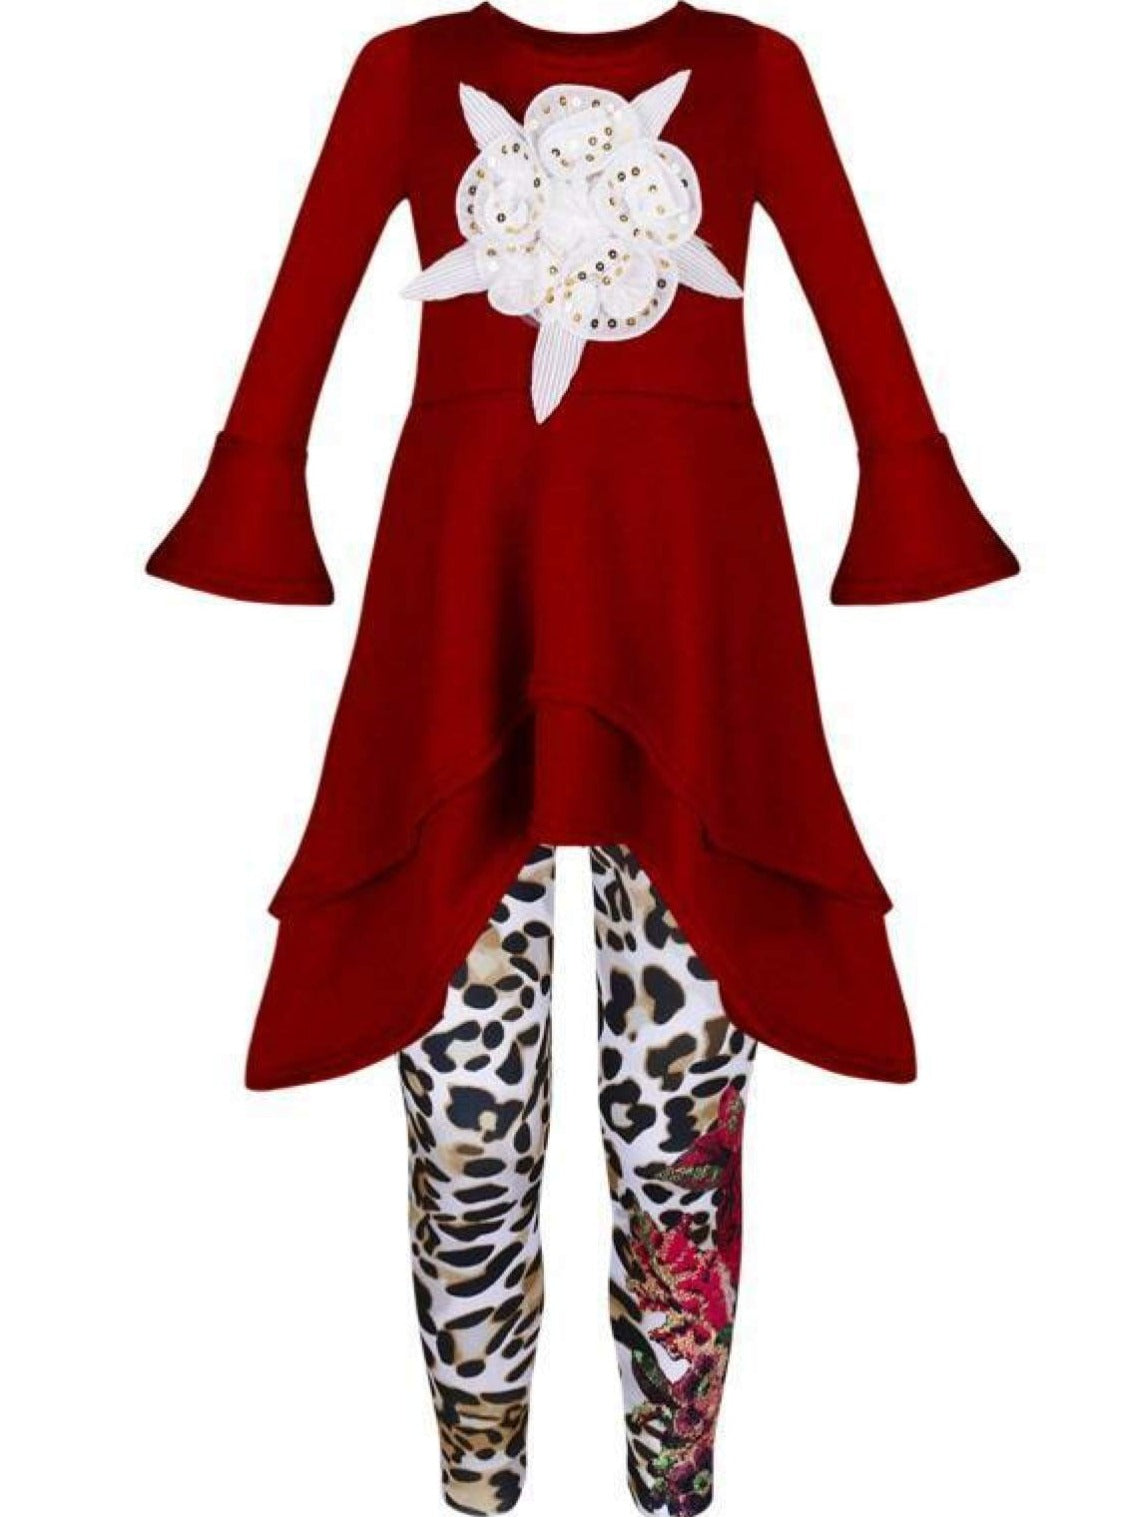 Girls Double Tiered Side Tail Applique Tunic & Printed Leggings Set - Burgundy / 2T/3T - Girls Fall Dressy Set